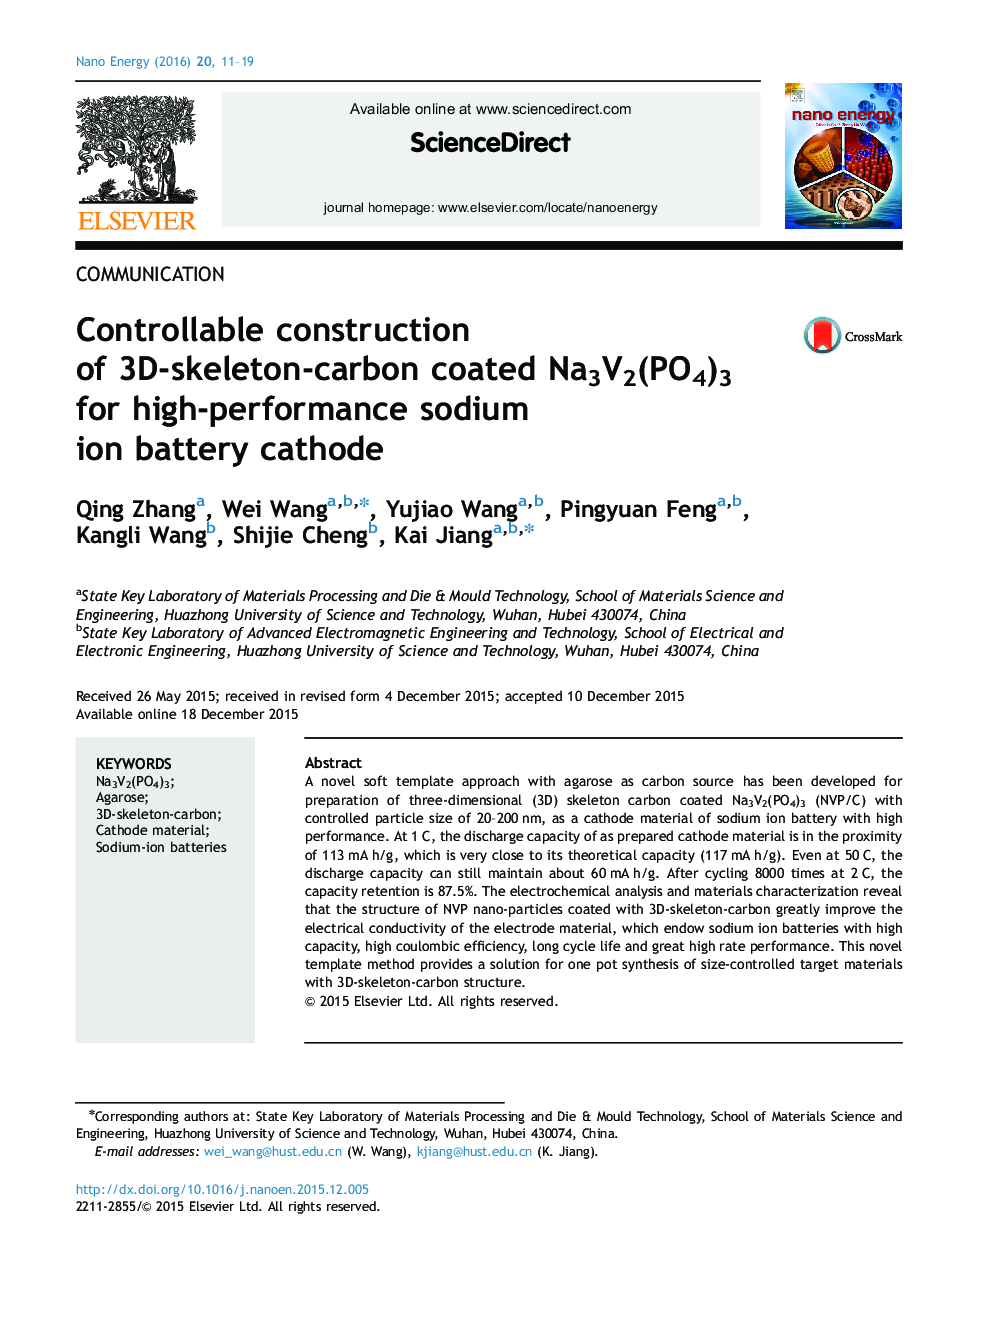 Controllable construction of 3D-skeleton-carbon coated Na3V2(PO4)3 for high-performance sodium ion battery cathode